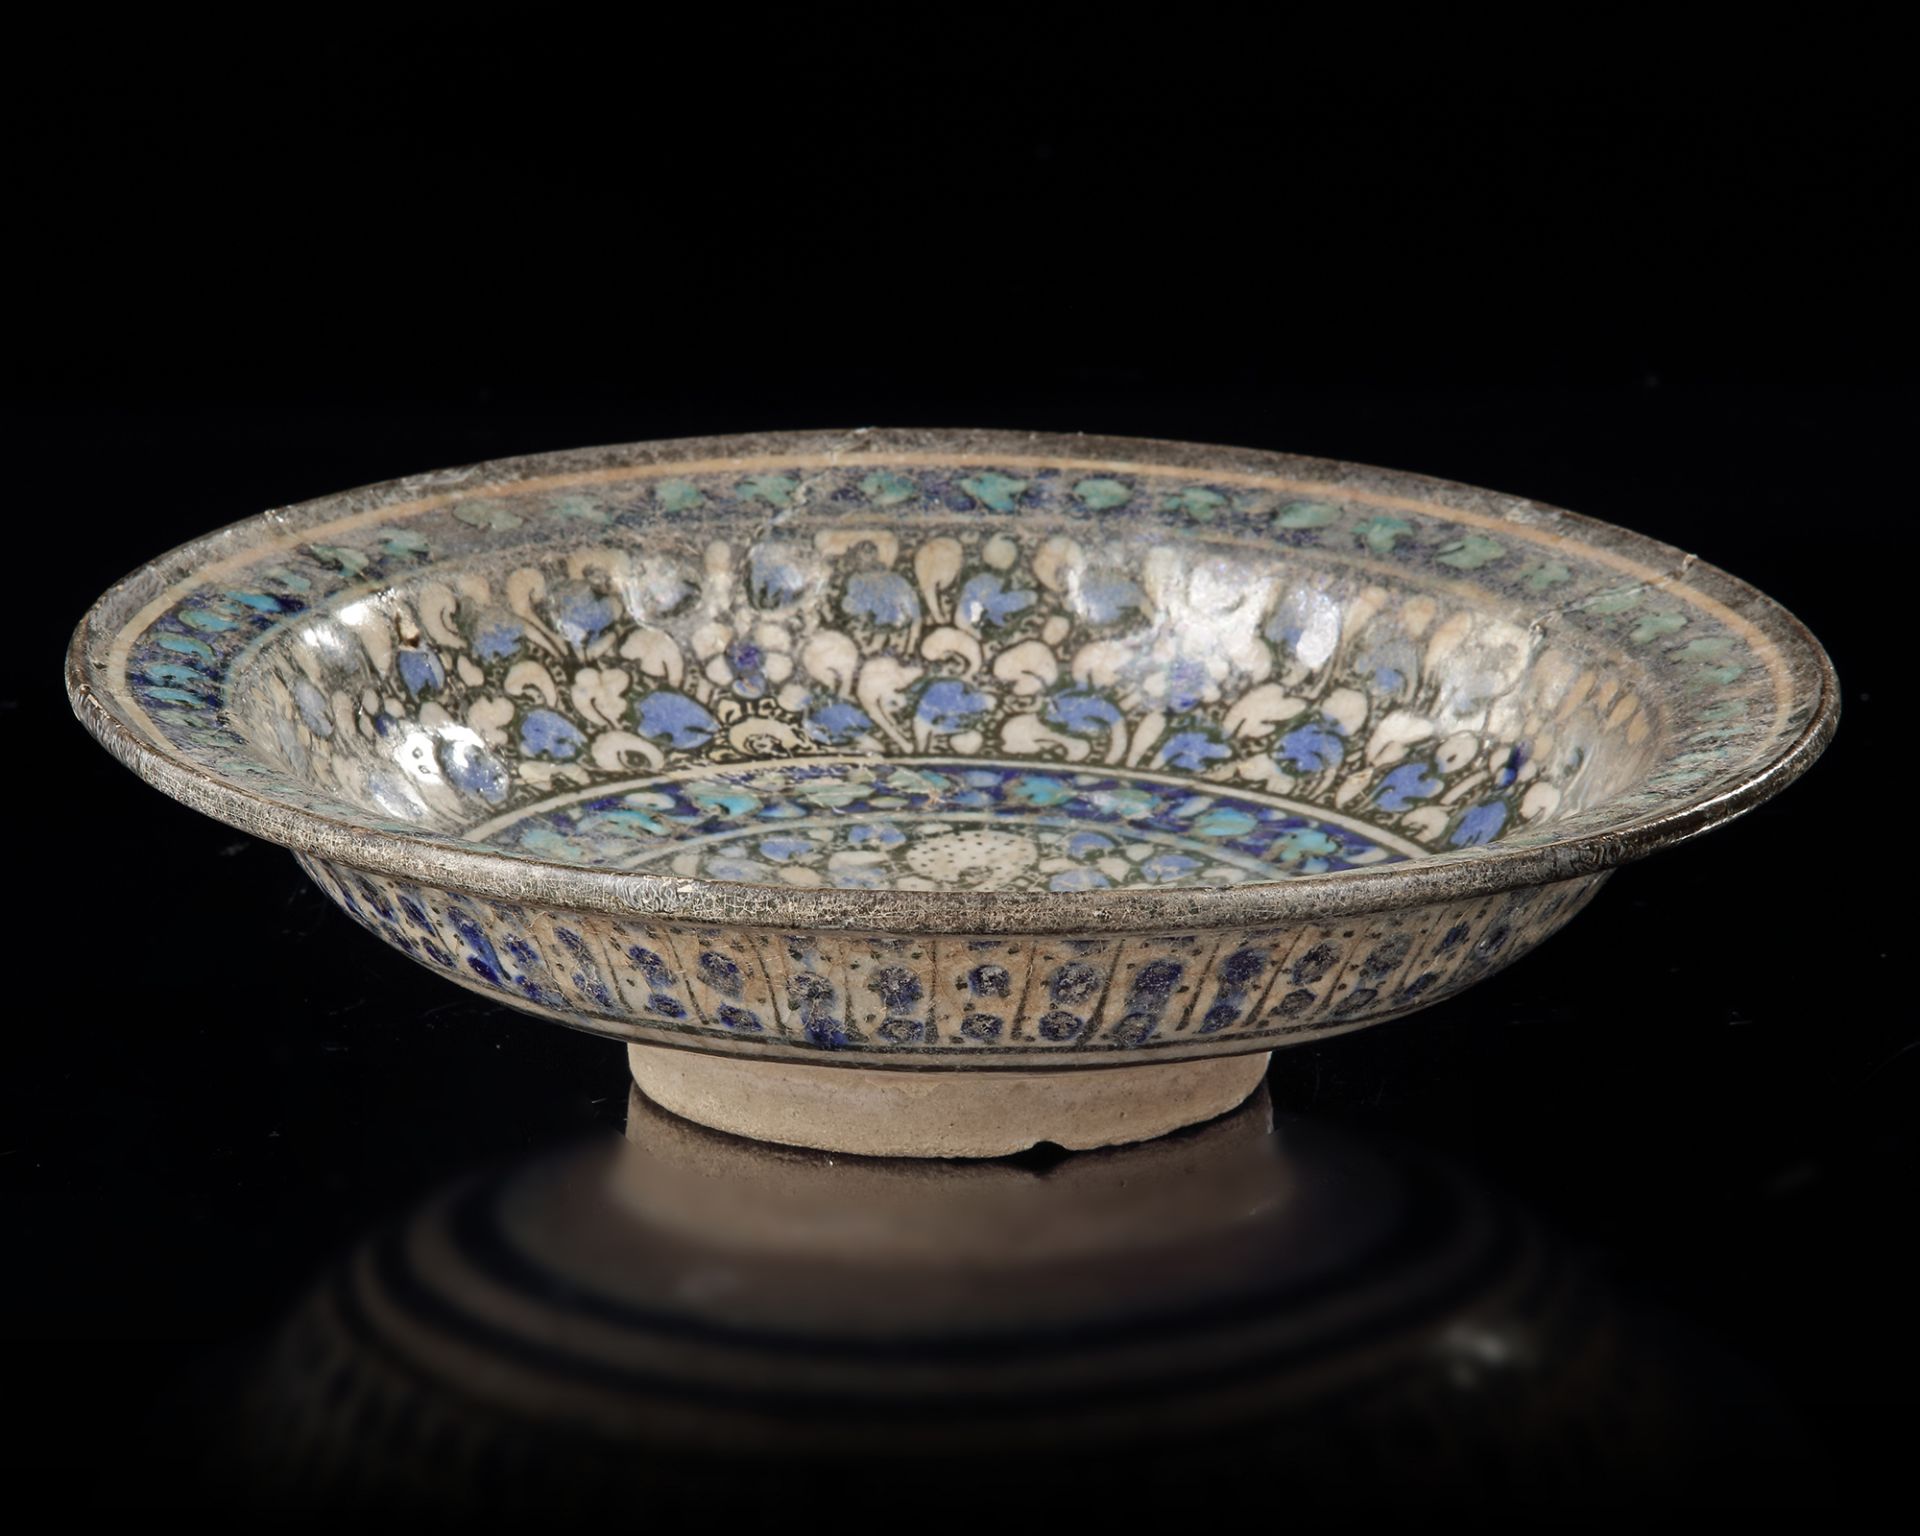 A SULTANABAD POTTERY DISH, NORTH PERSIA, LATE 13TH-EARLY 14TH CENTURY - Bild 3 aus 4